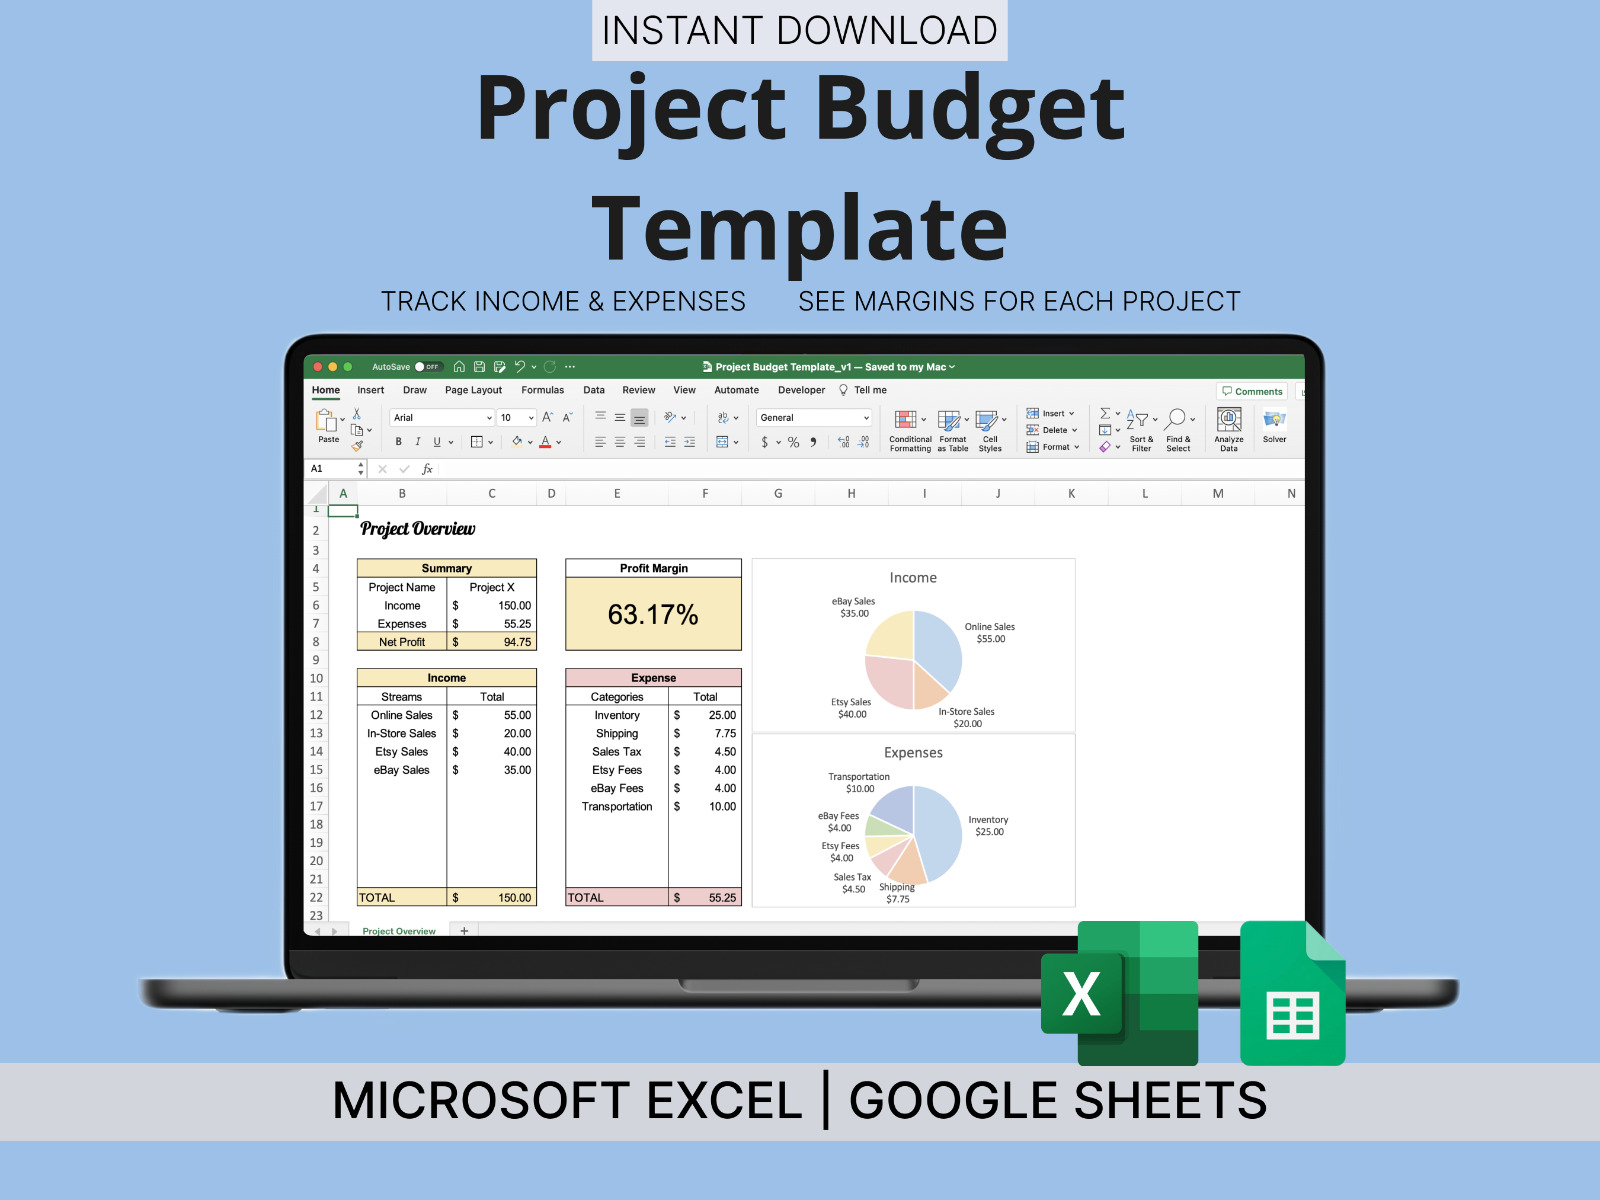 Project Budget Template Microsoft Excel/Google Sheets, Track Income & Expenses